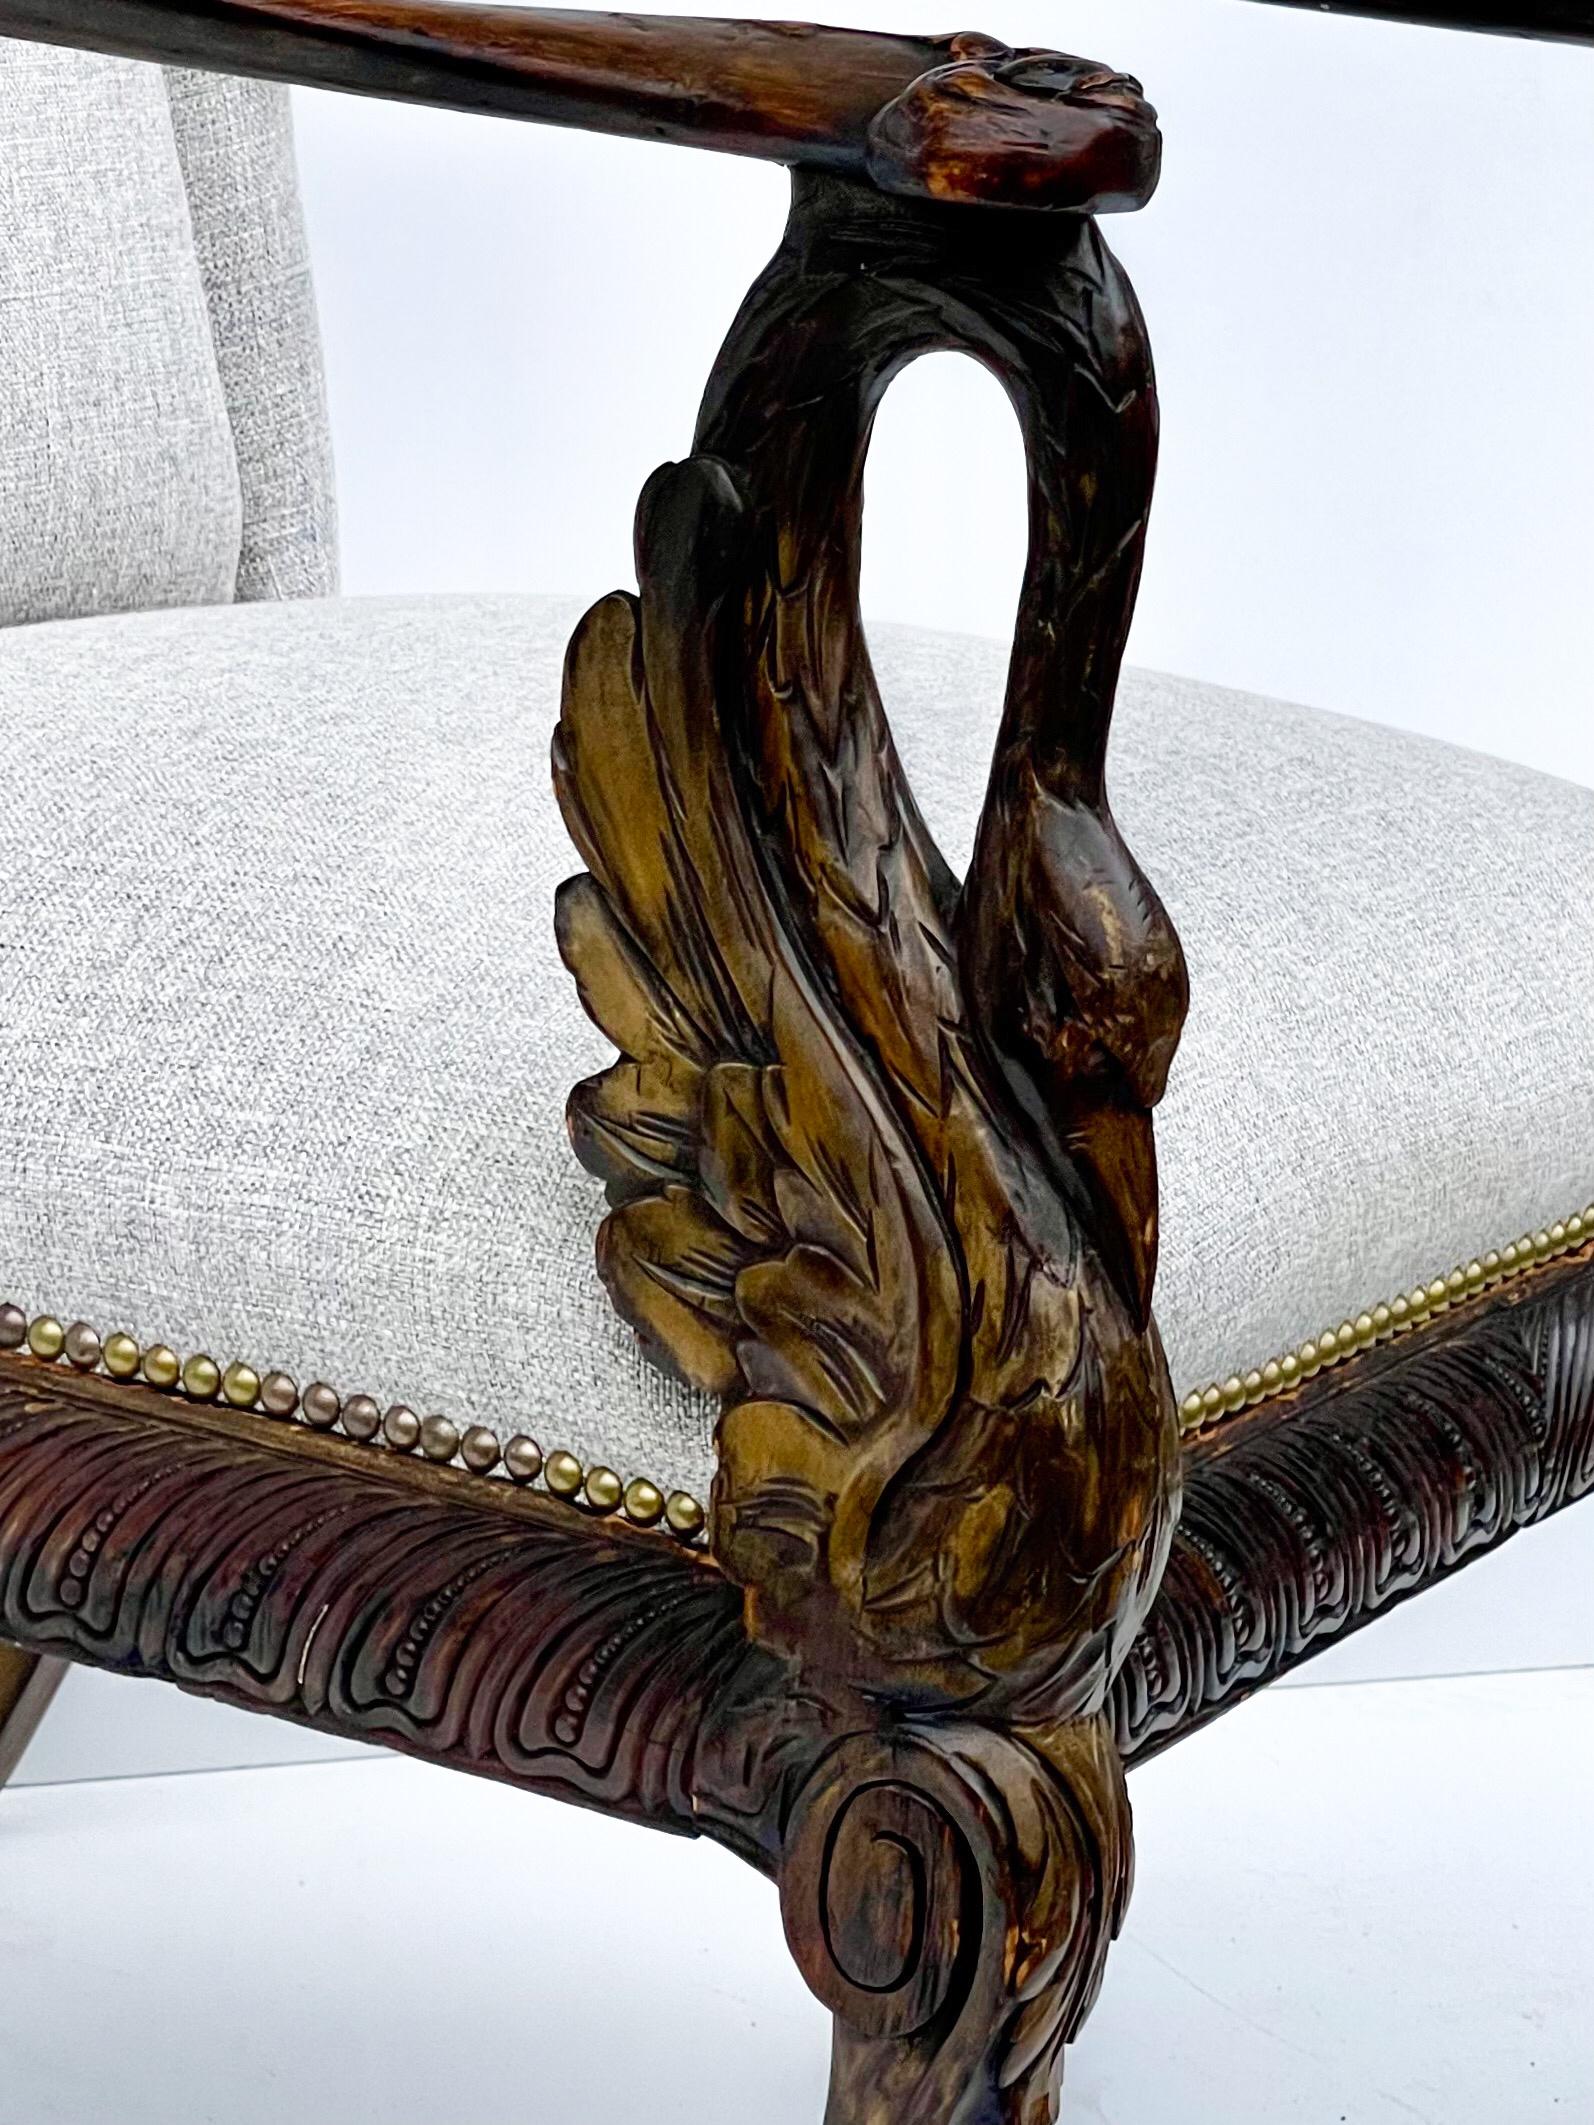 19th-C. Italian Neo-Classical Style Carved Walnut Arm Chair with Swan Form Arms For Sale 1